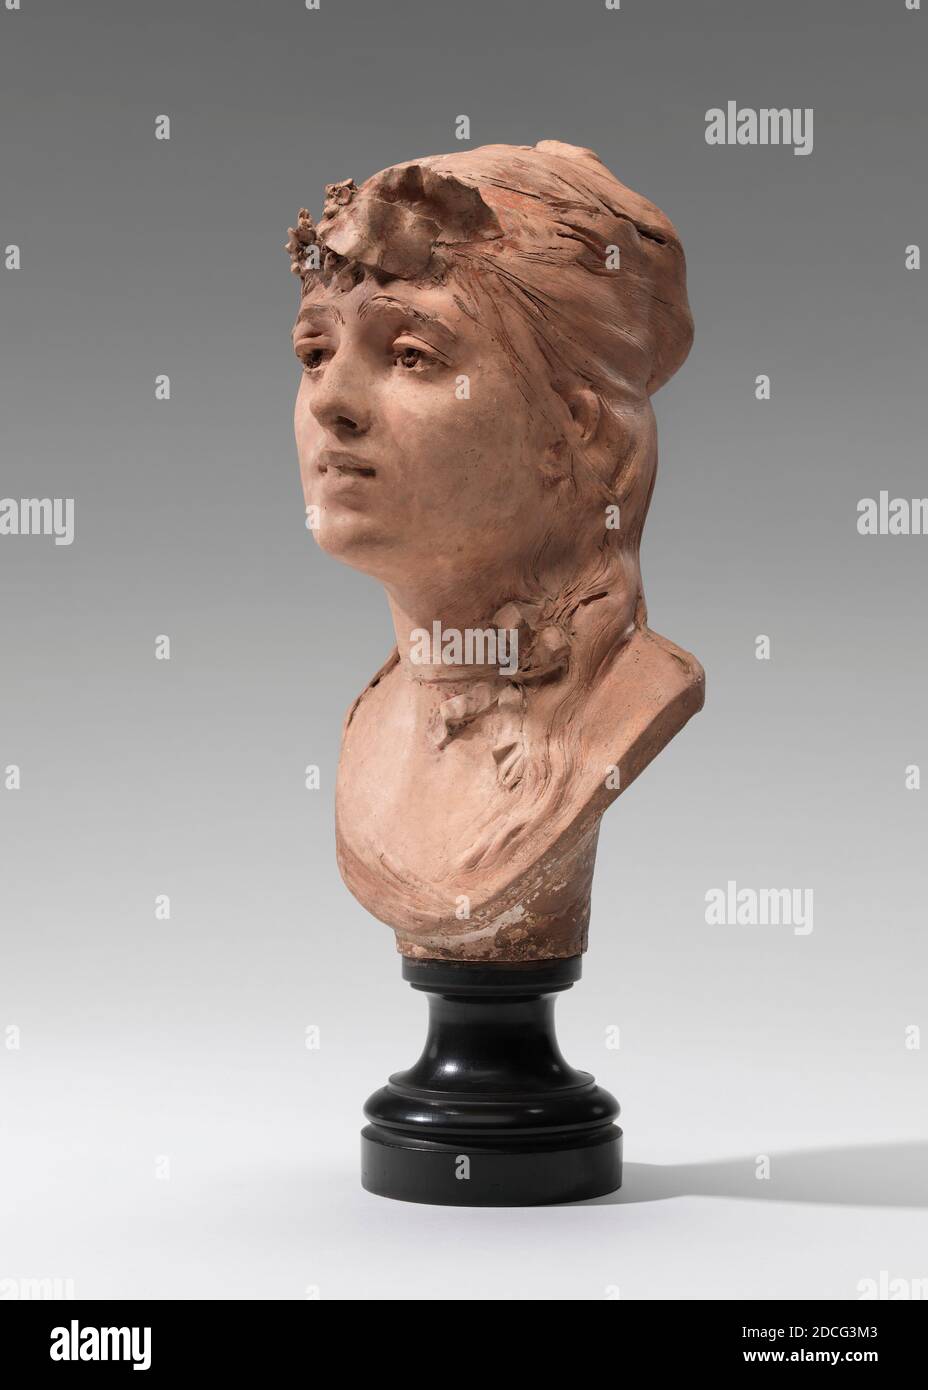 https://c8.alamy.com/comp/2DCG3M3/auguste-rodin-sculptor-french-1840-1917-bust-of-a-young-girl-1868-terracotta-with-plaster-overall-without-base-311-x-165-x-175-cm-12-14-x-6-12-x-6-78-in-overall-with-base-40-x-165-x-175-cm-15-34-x-6-12-x-6-78-in-2DCG3M3.jpg